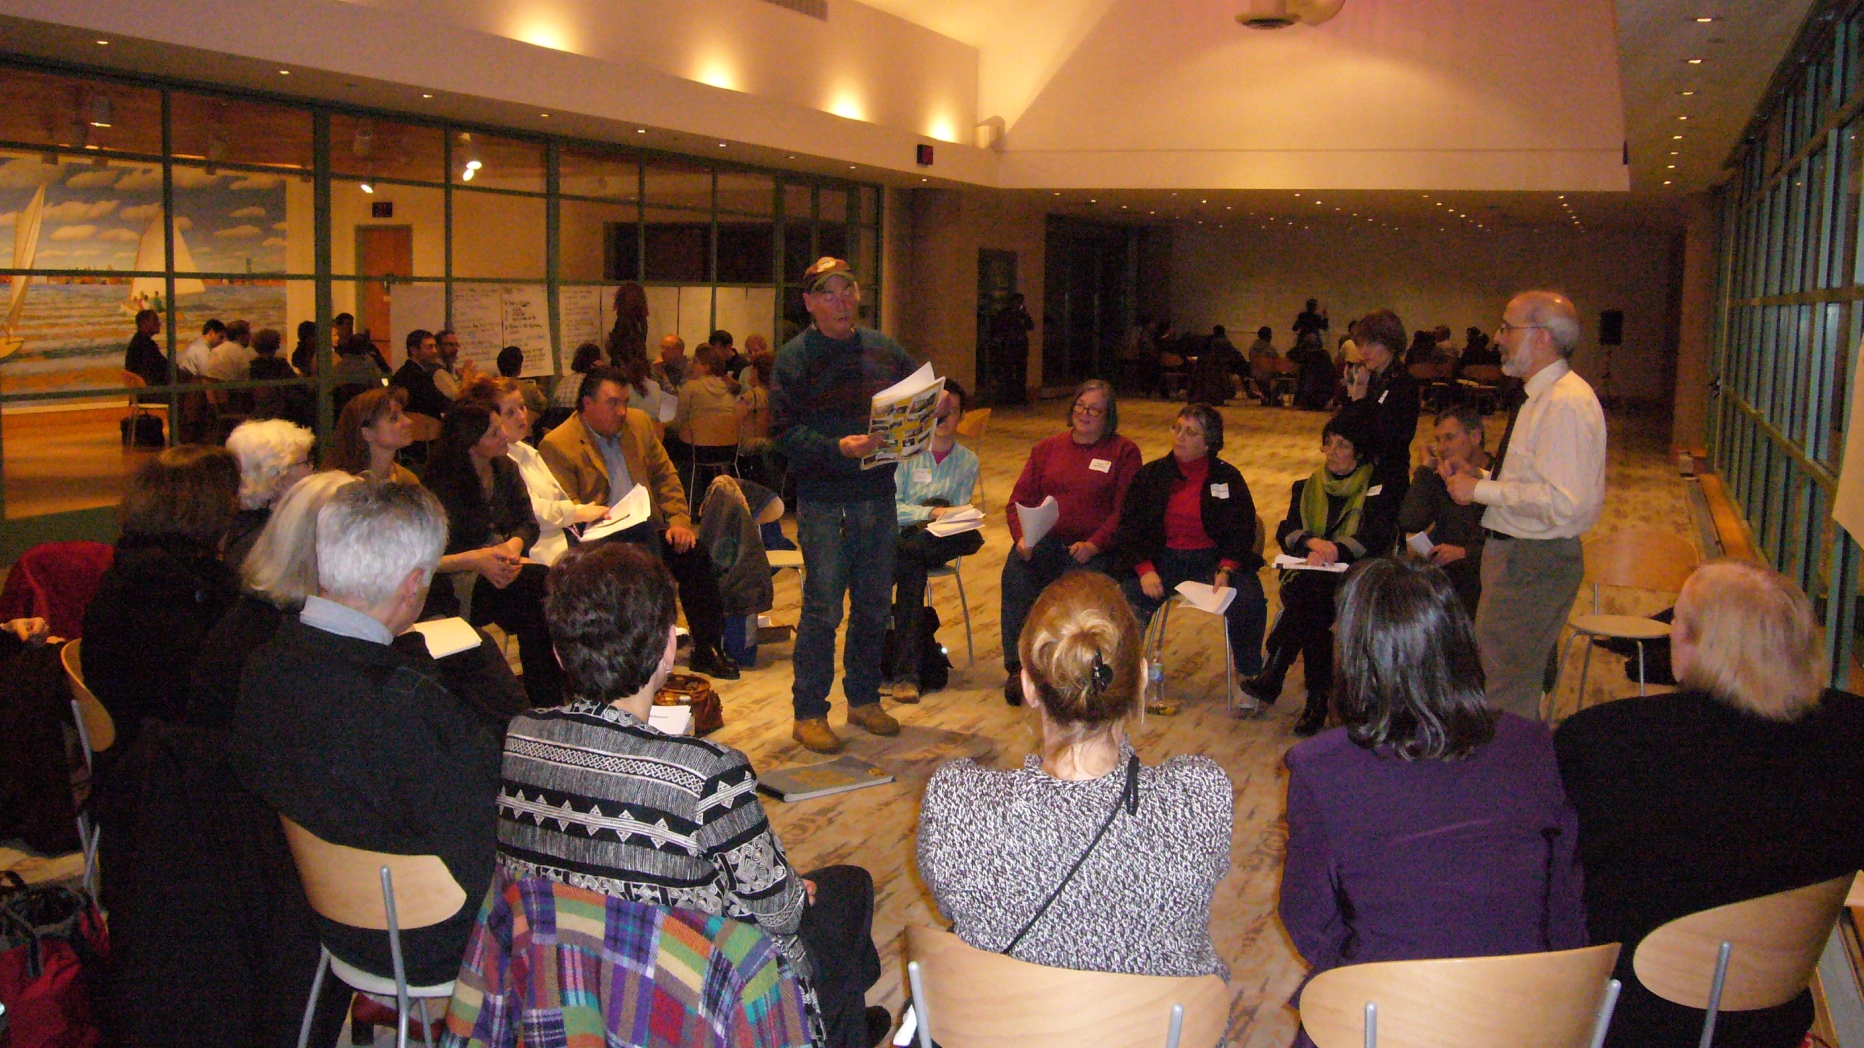 Project participants sit in a circle of chairs. A man stands in the middle and speaks while holding a large book.